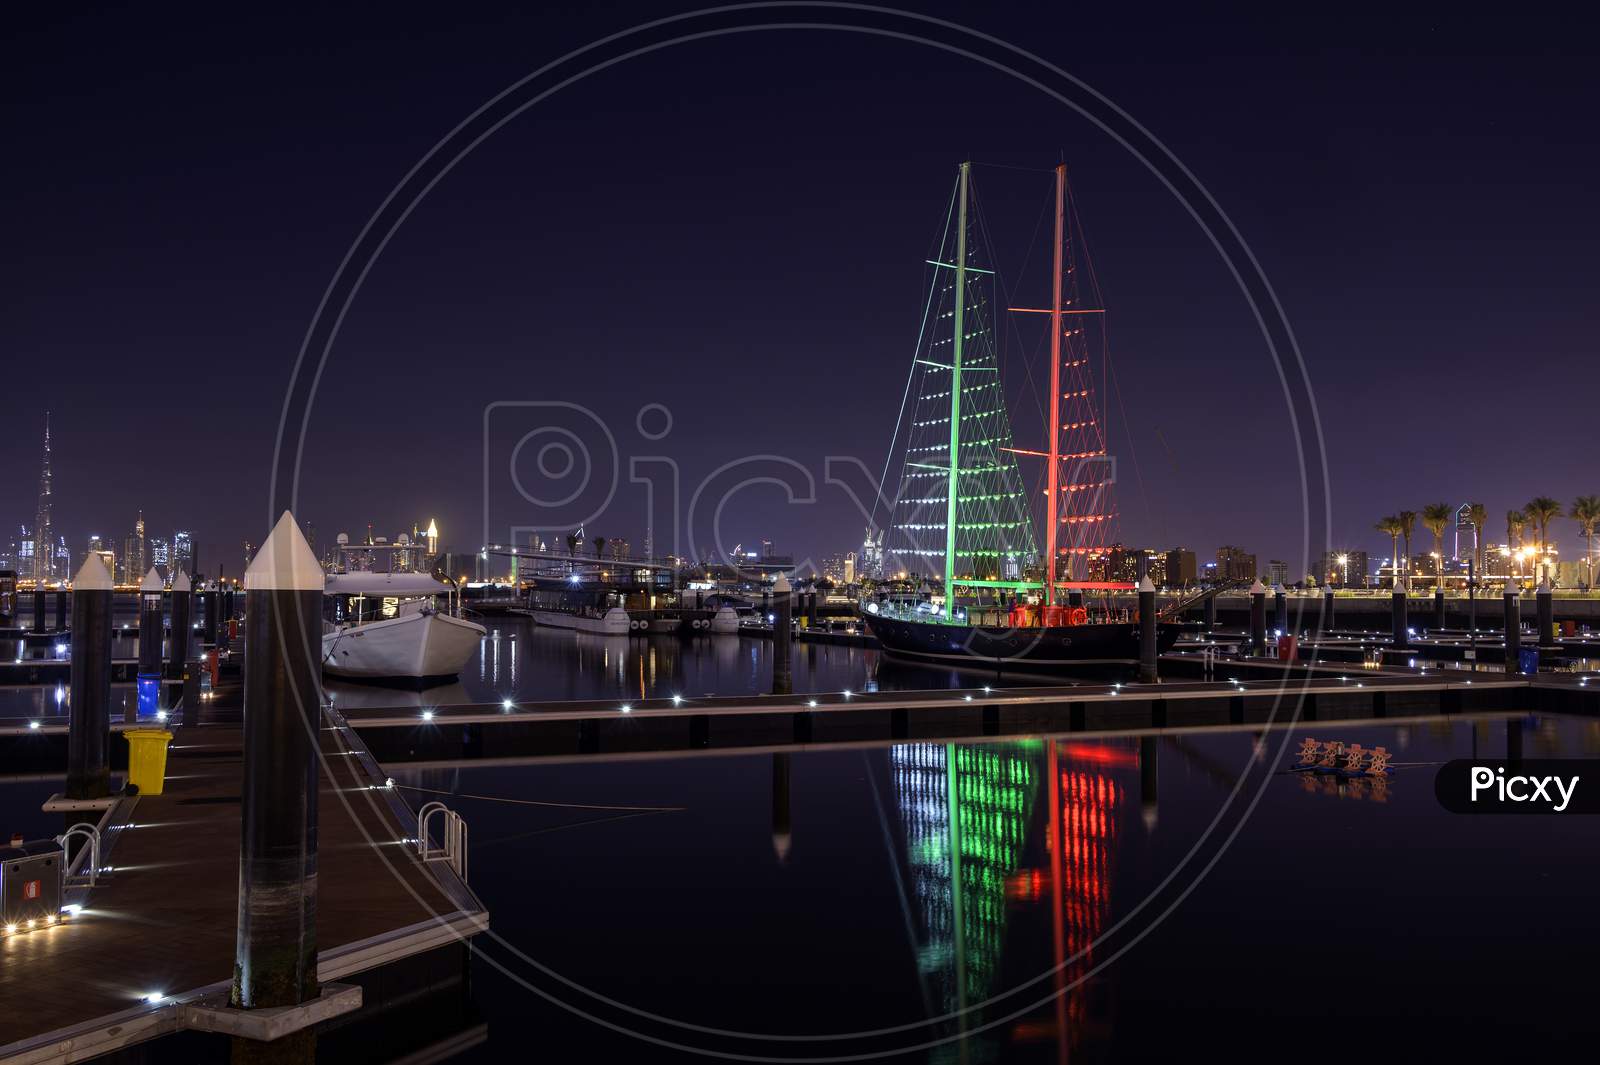 1St December 2020.Dubai Creek Harbor Skyline With Boats And Ships Illuminated In Flag Colours For The Uae National Day Captured At The Ras Al Khor, Dubai , Uae With The Burj Khalifa In The Background